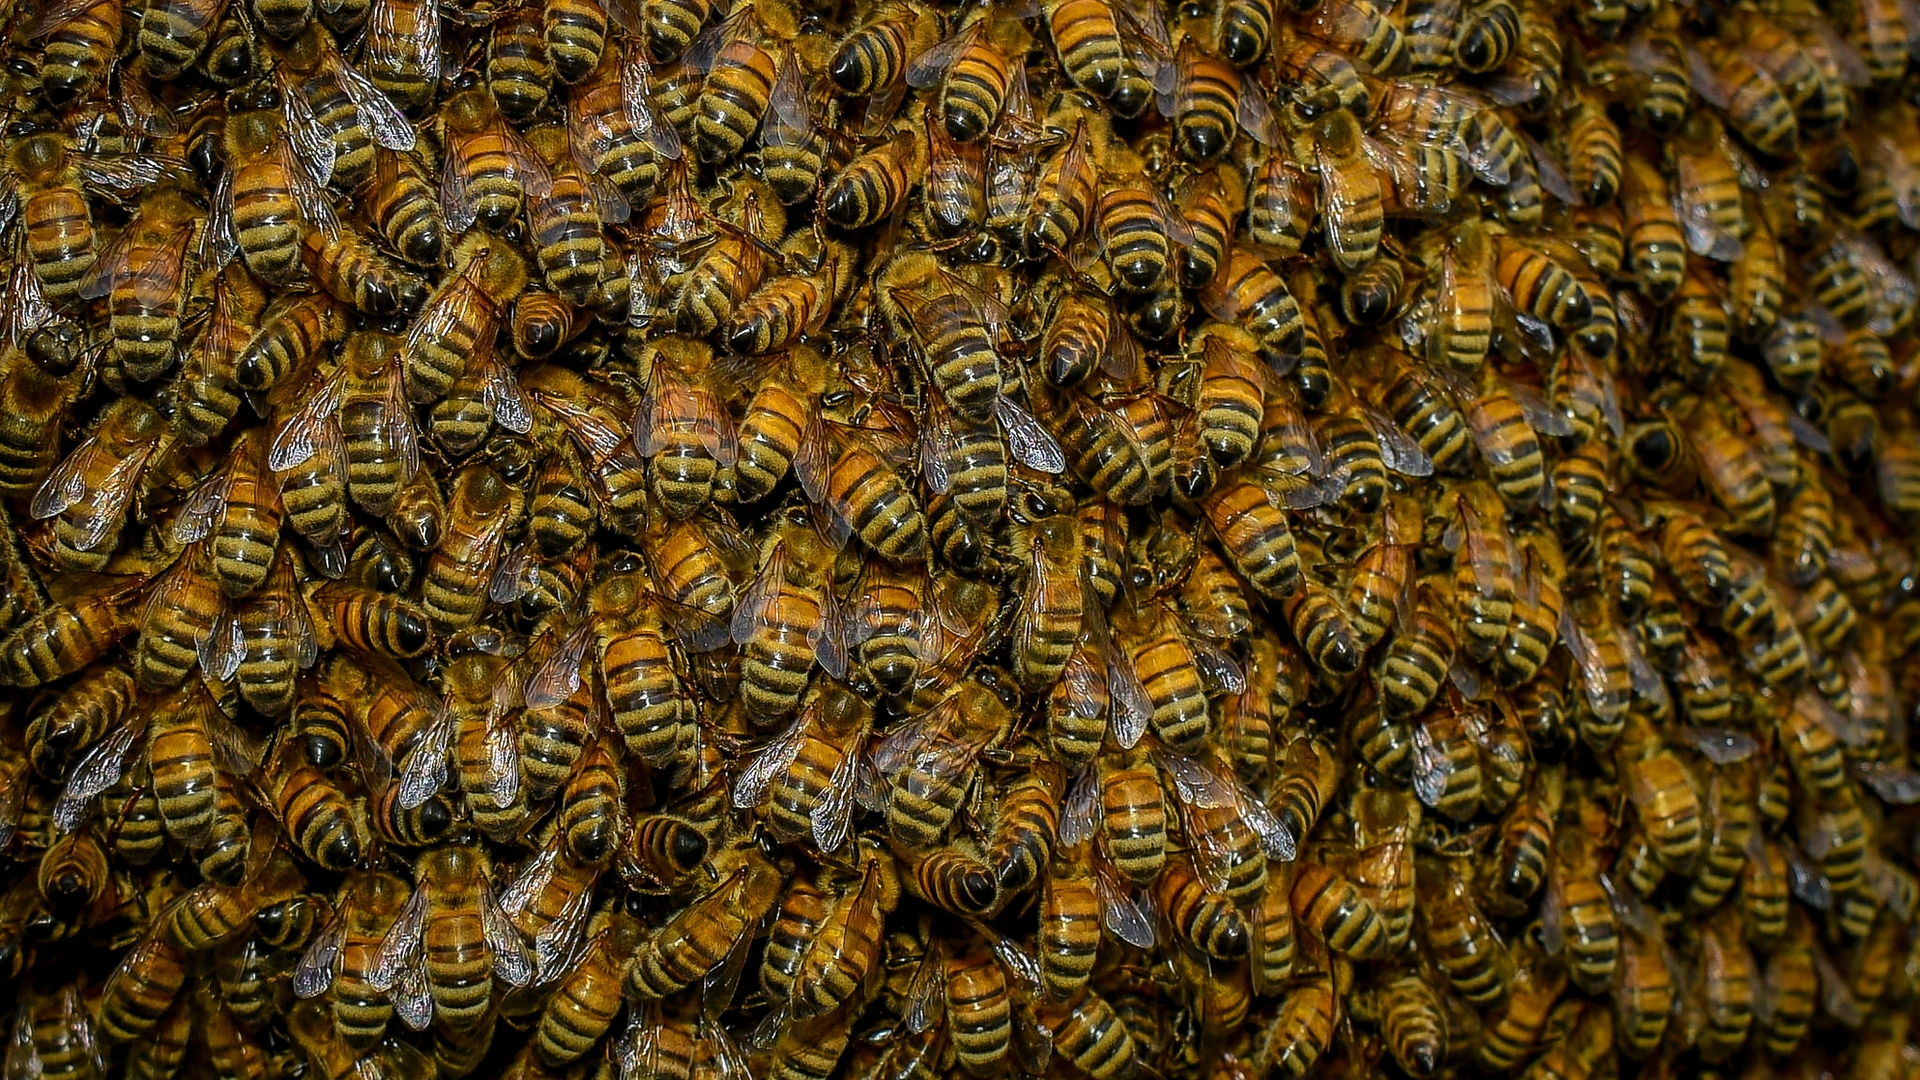 Swarm of Bees for 1920 x 1080 HDTV 1080p resolution